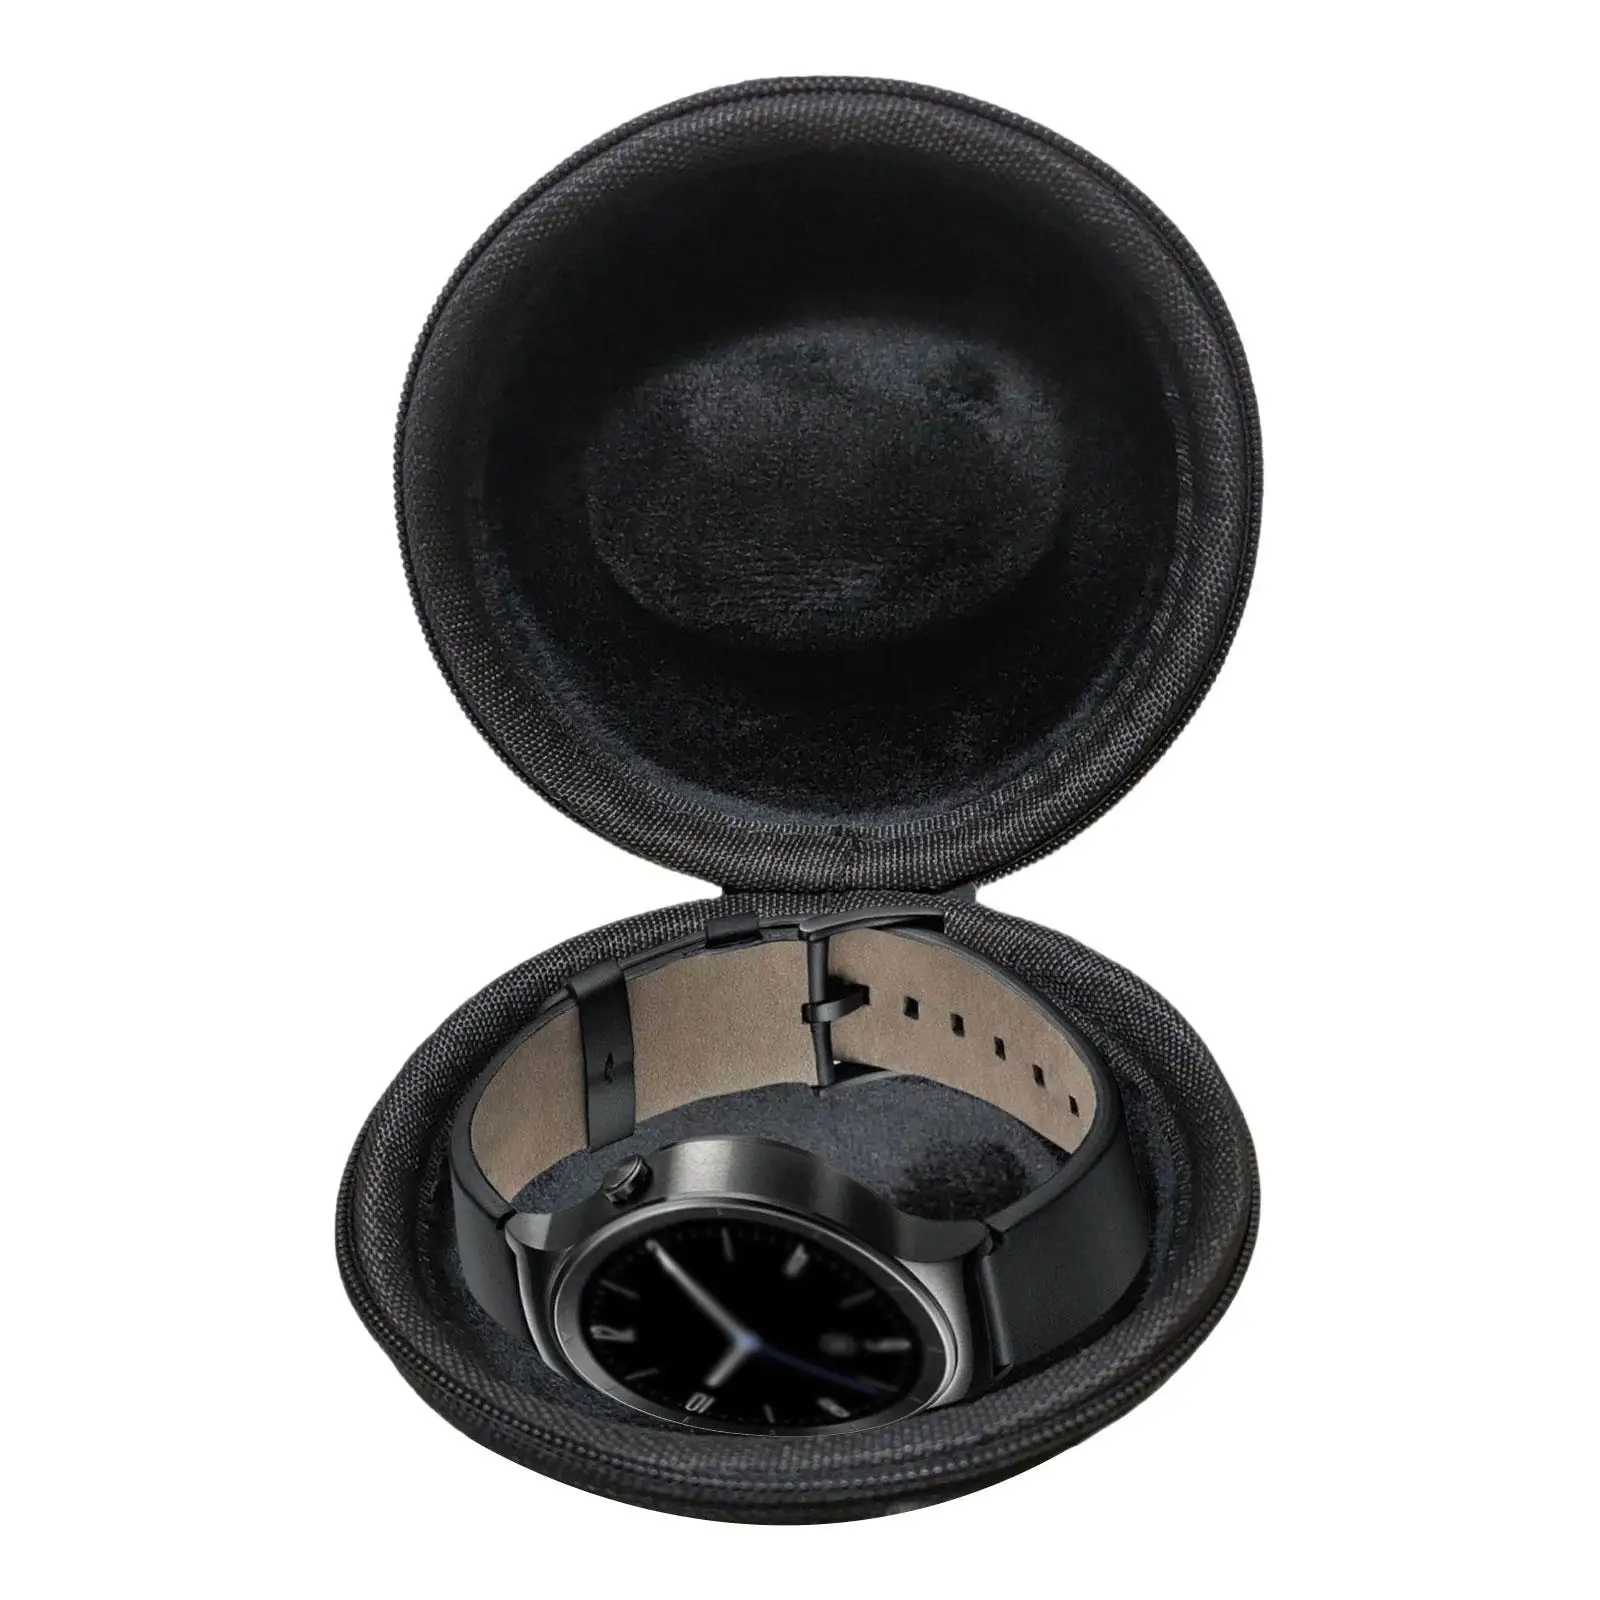 Travel Single Watch Case Box Pouch Holder Cushioned Interior Versatile Accessory Black with Zipper Donut Shape for Smart Watches